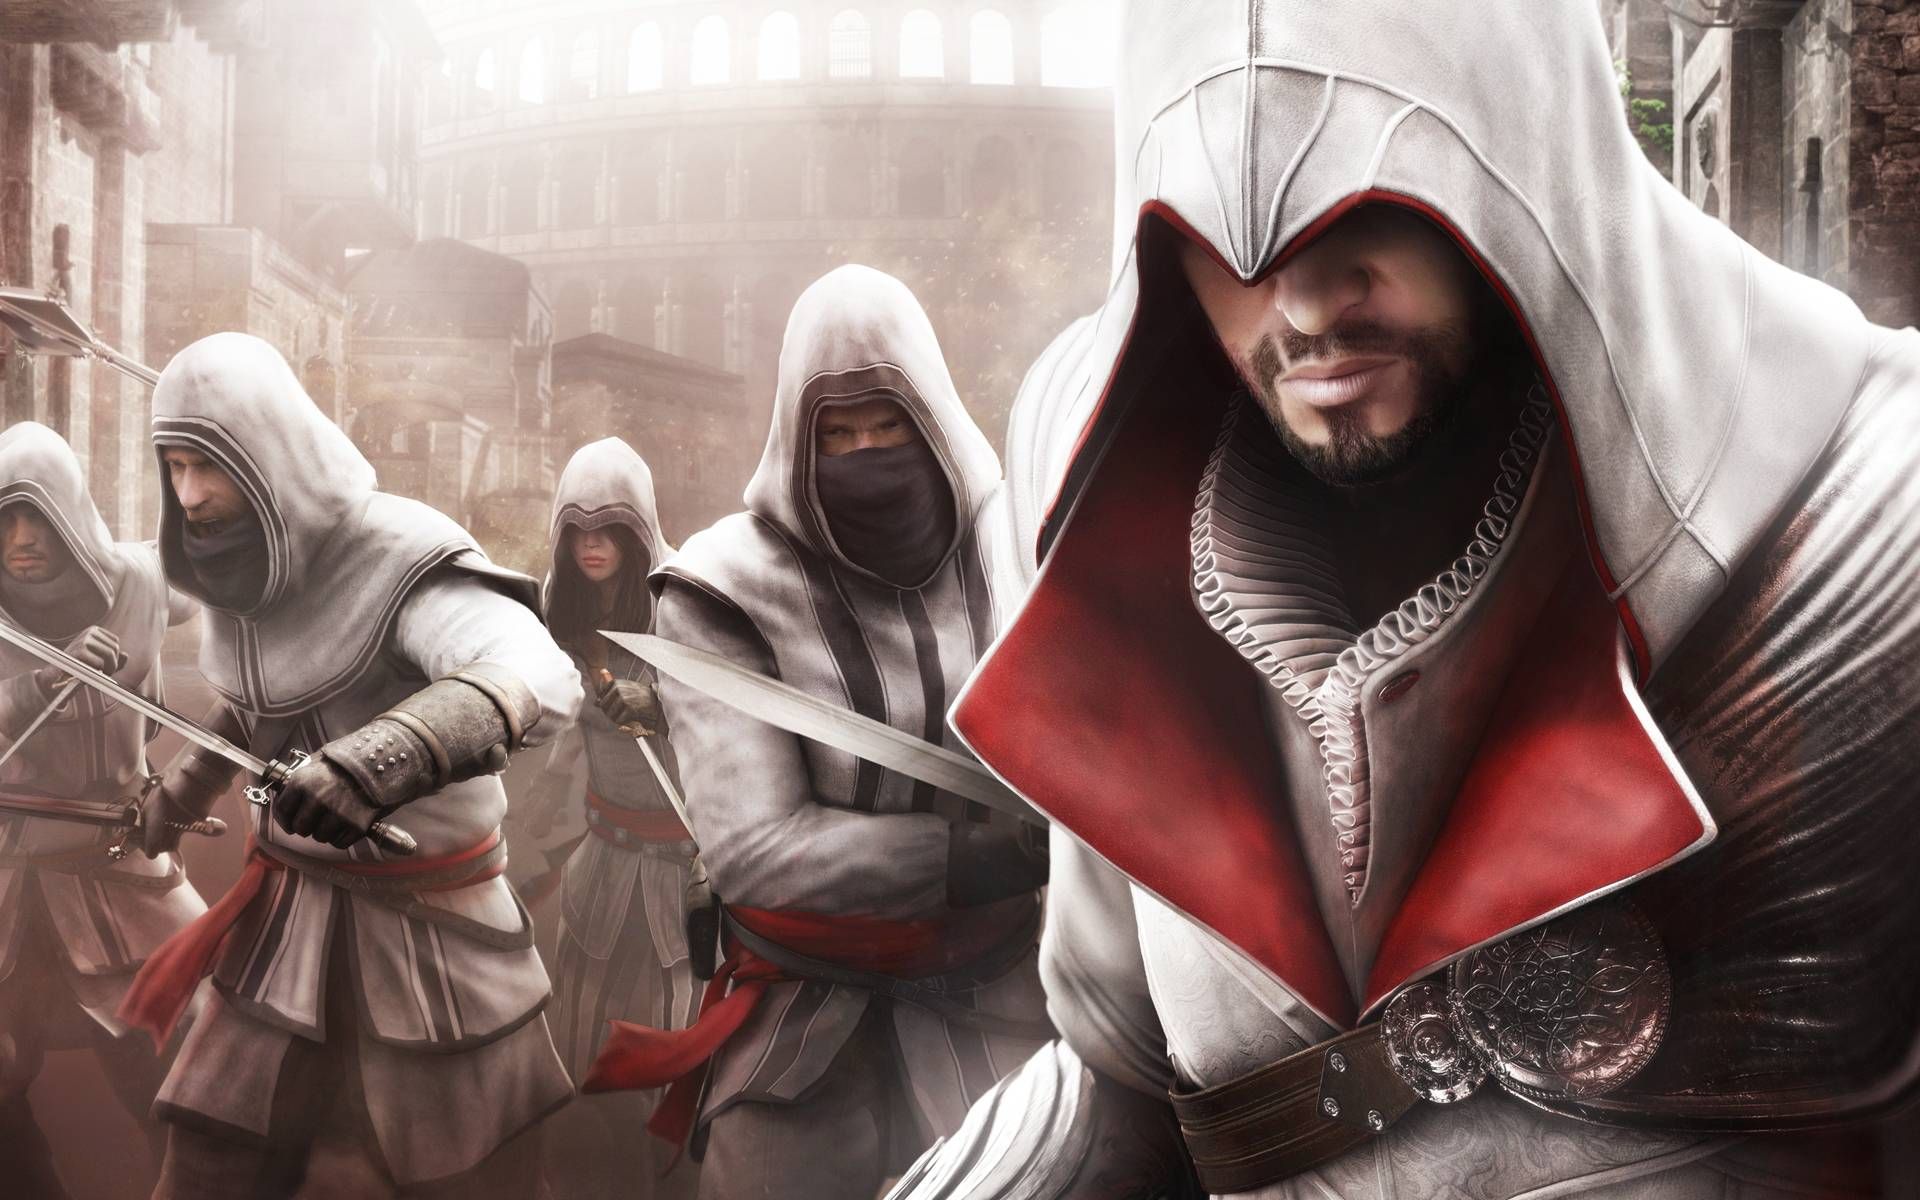 The Ezio Collection Image. Assassin's creed, Assassin's creed